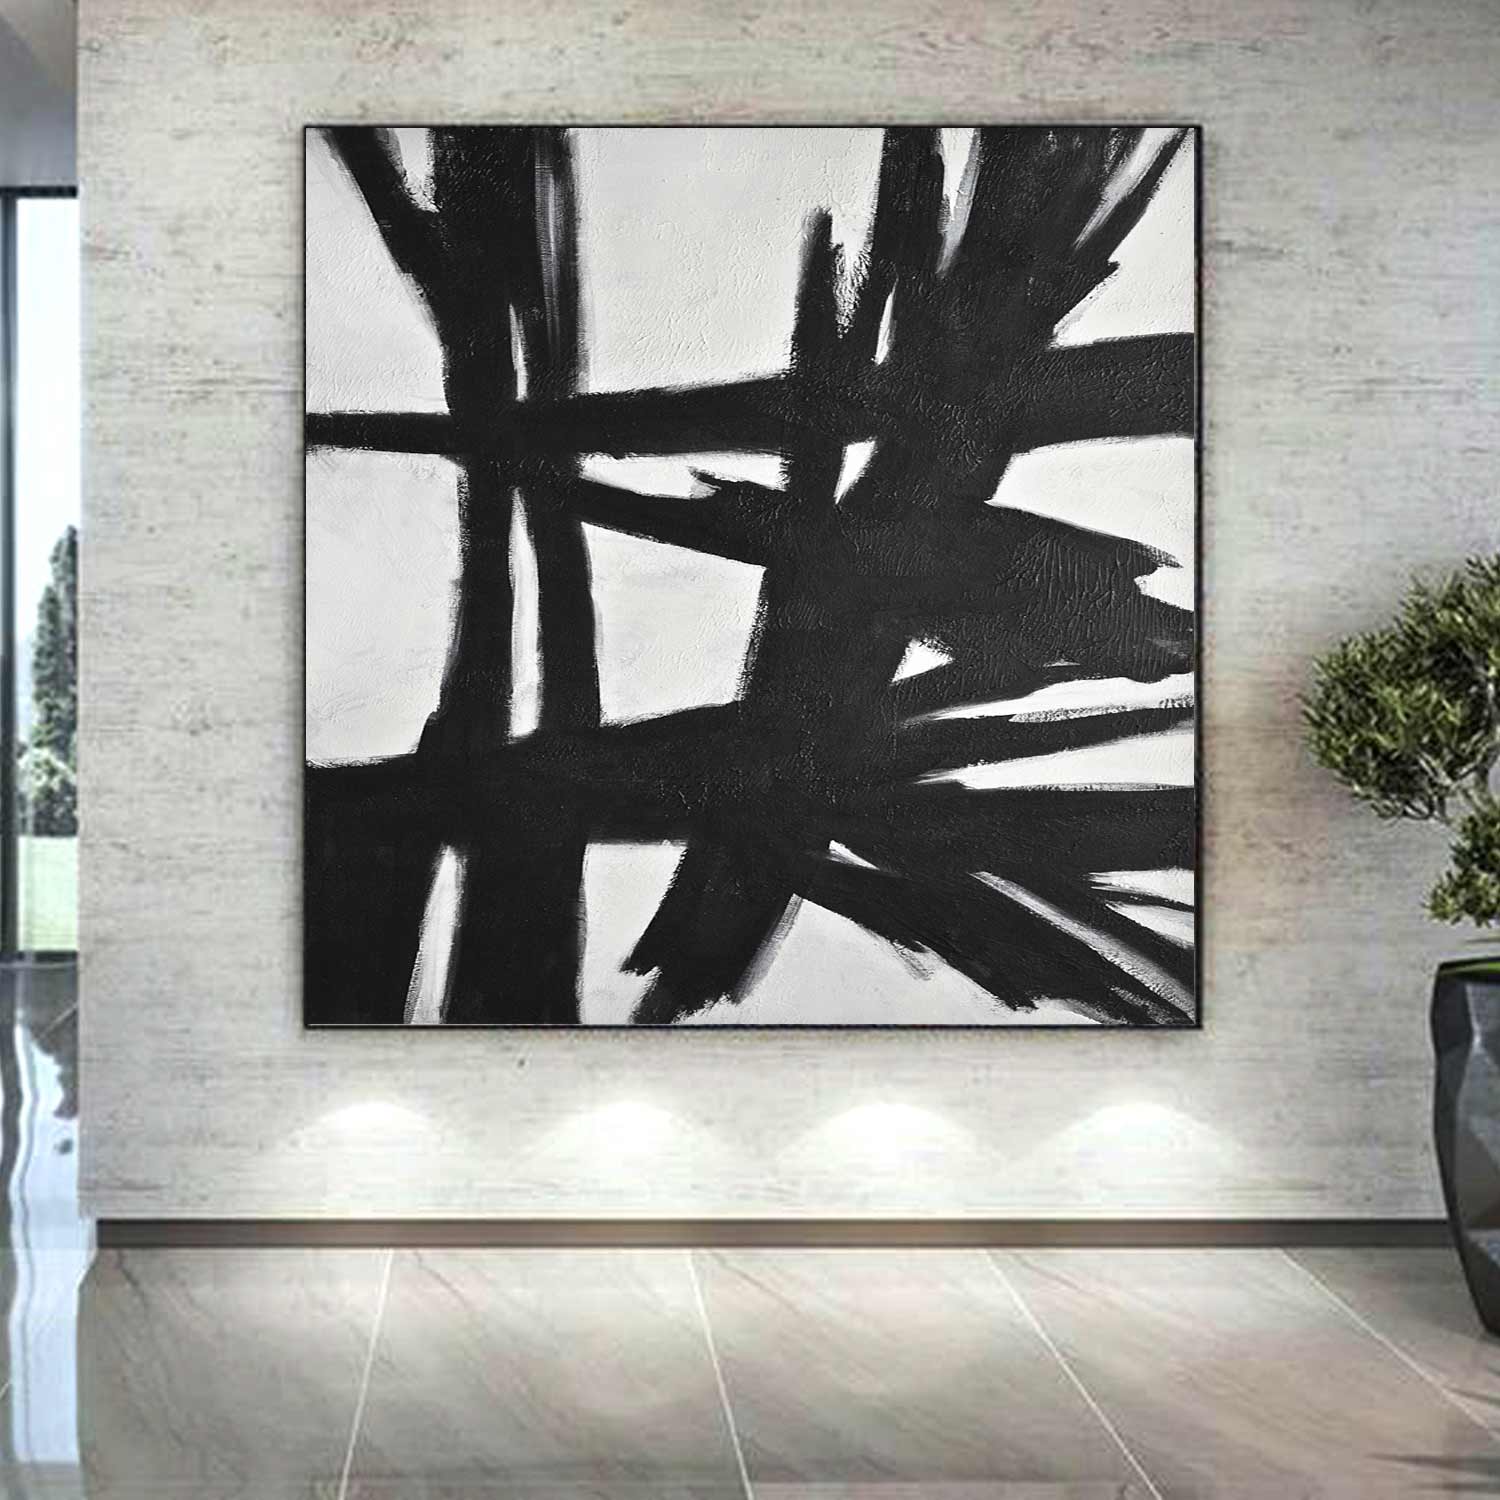 Franz Kline Style 50's Retro Painting Black White On Canvas "Reaching Out"